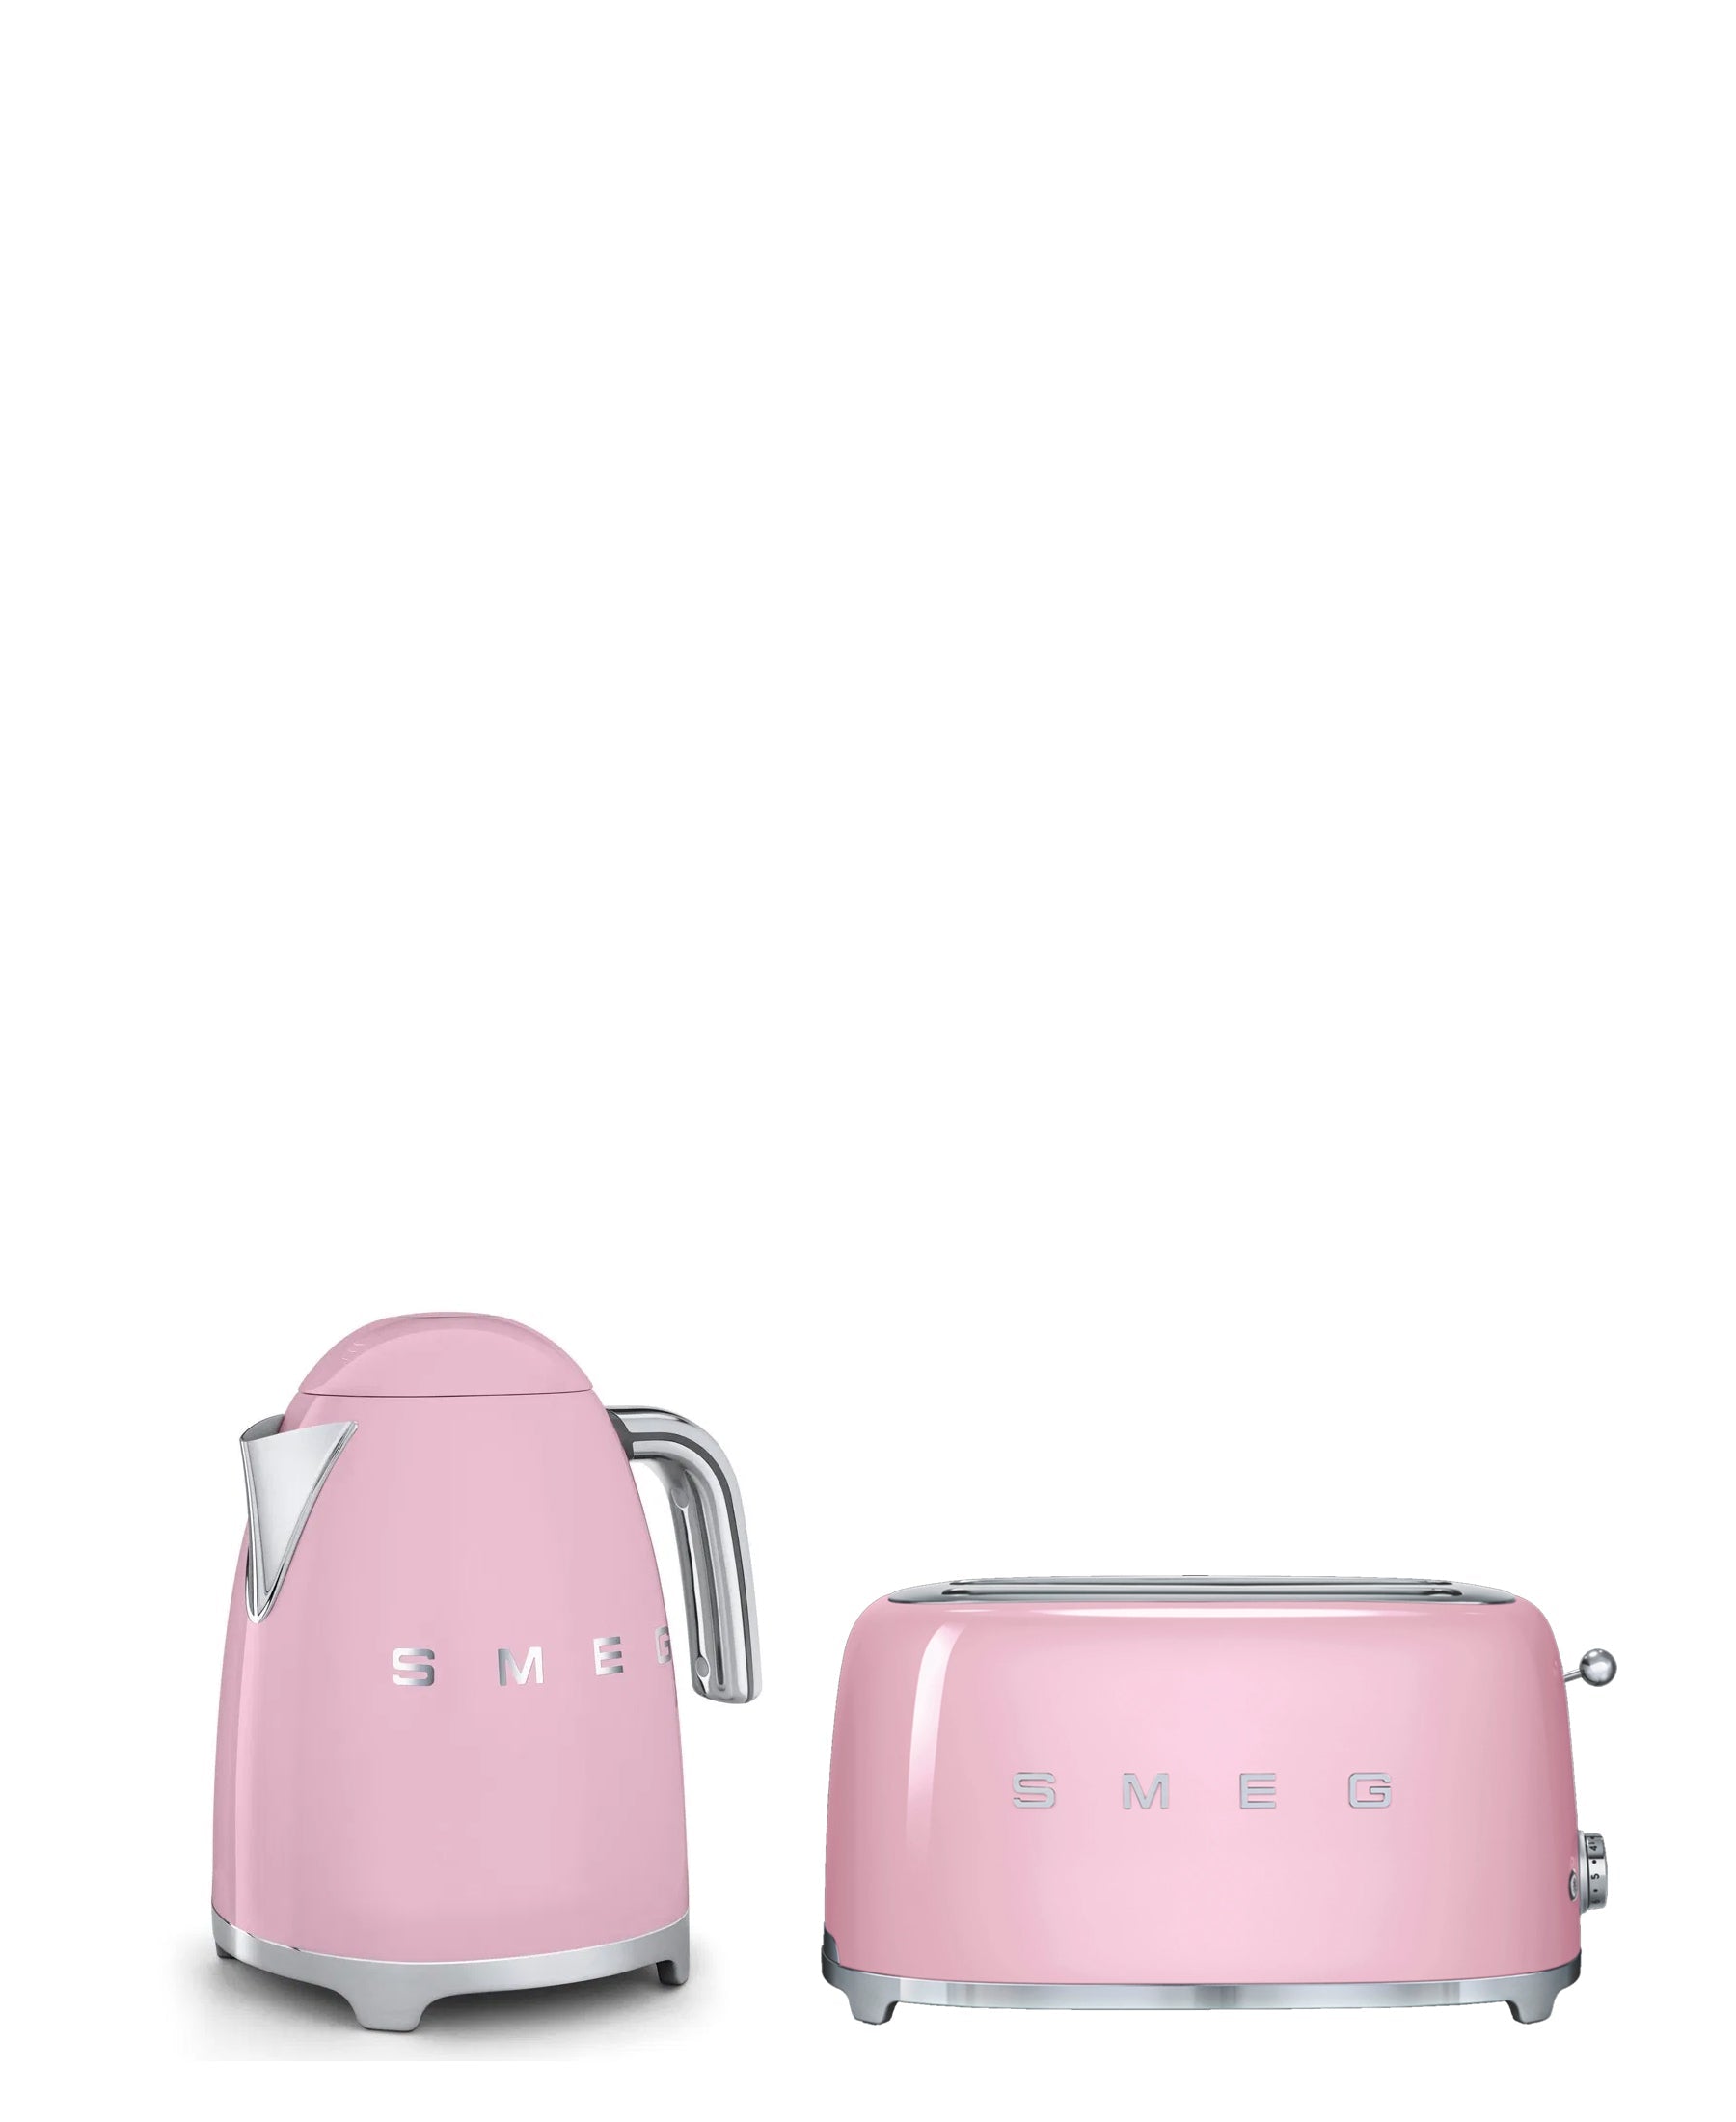 Smeg Kettle & Toaster Combo - Pink – Bawas Furnishers